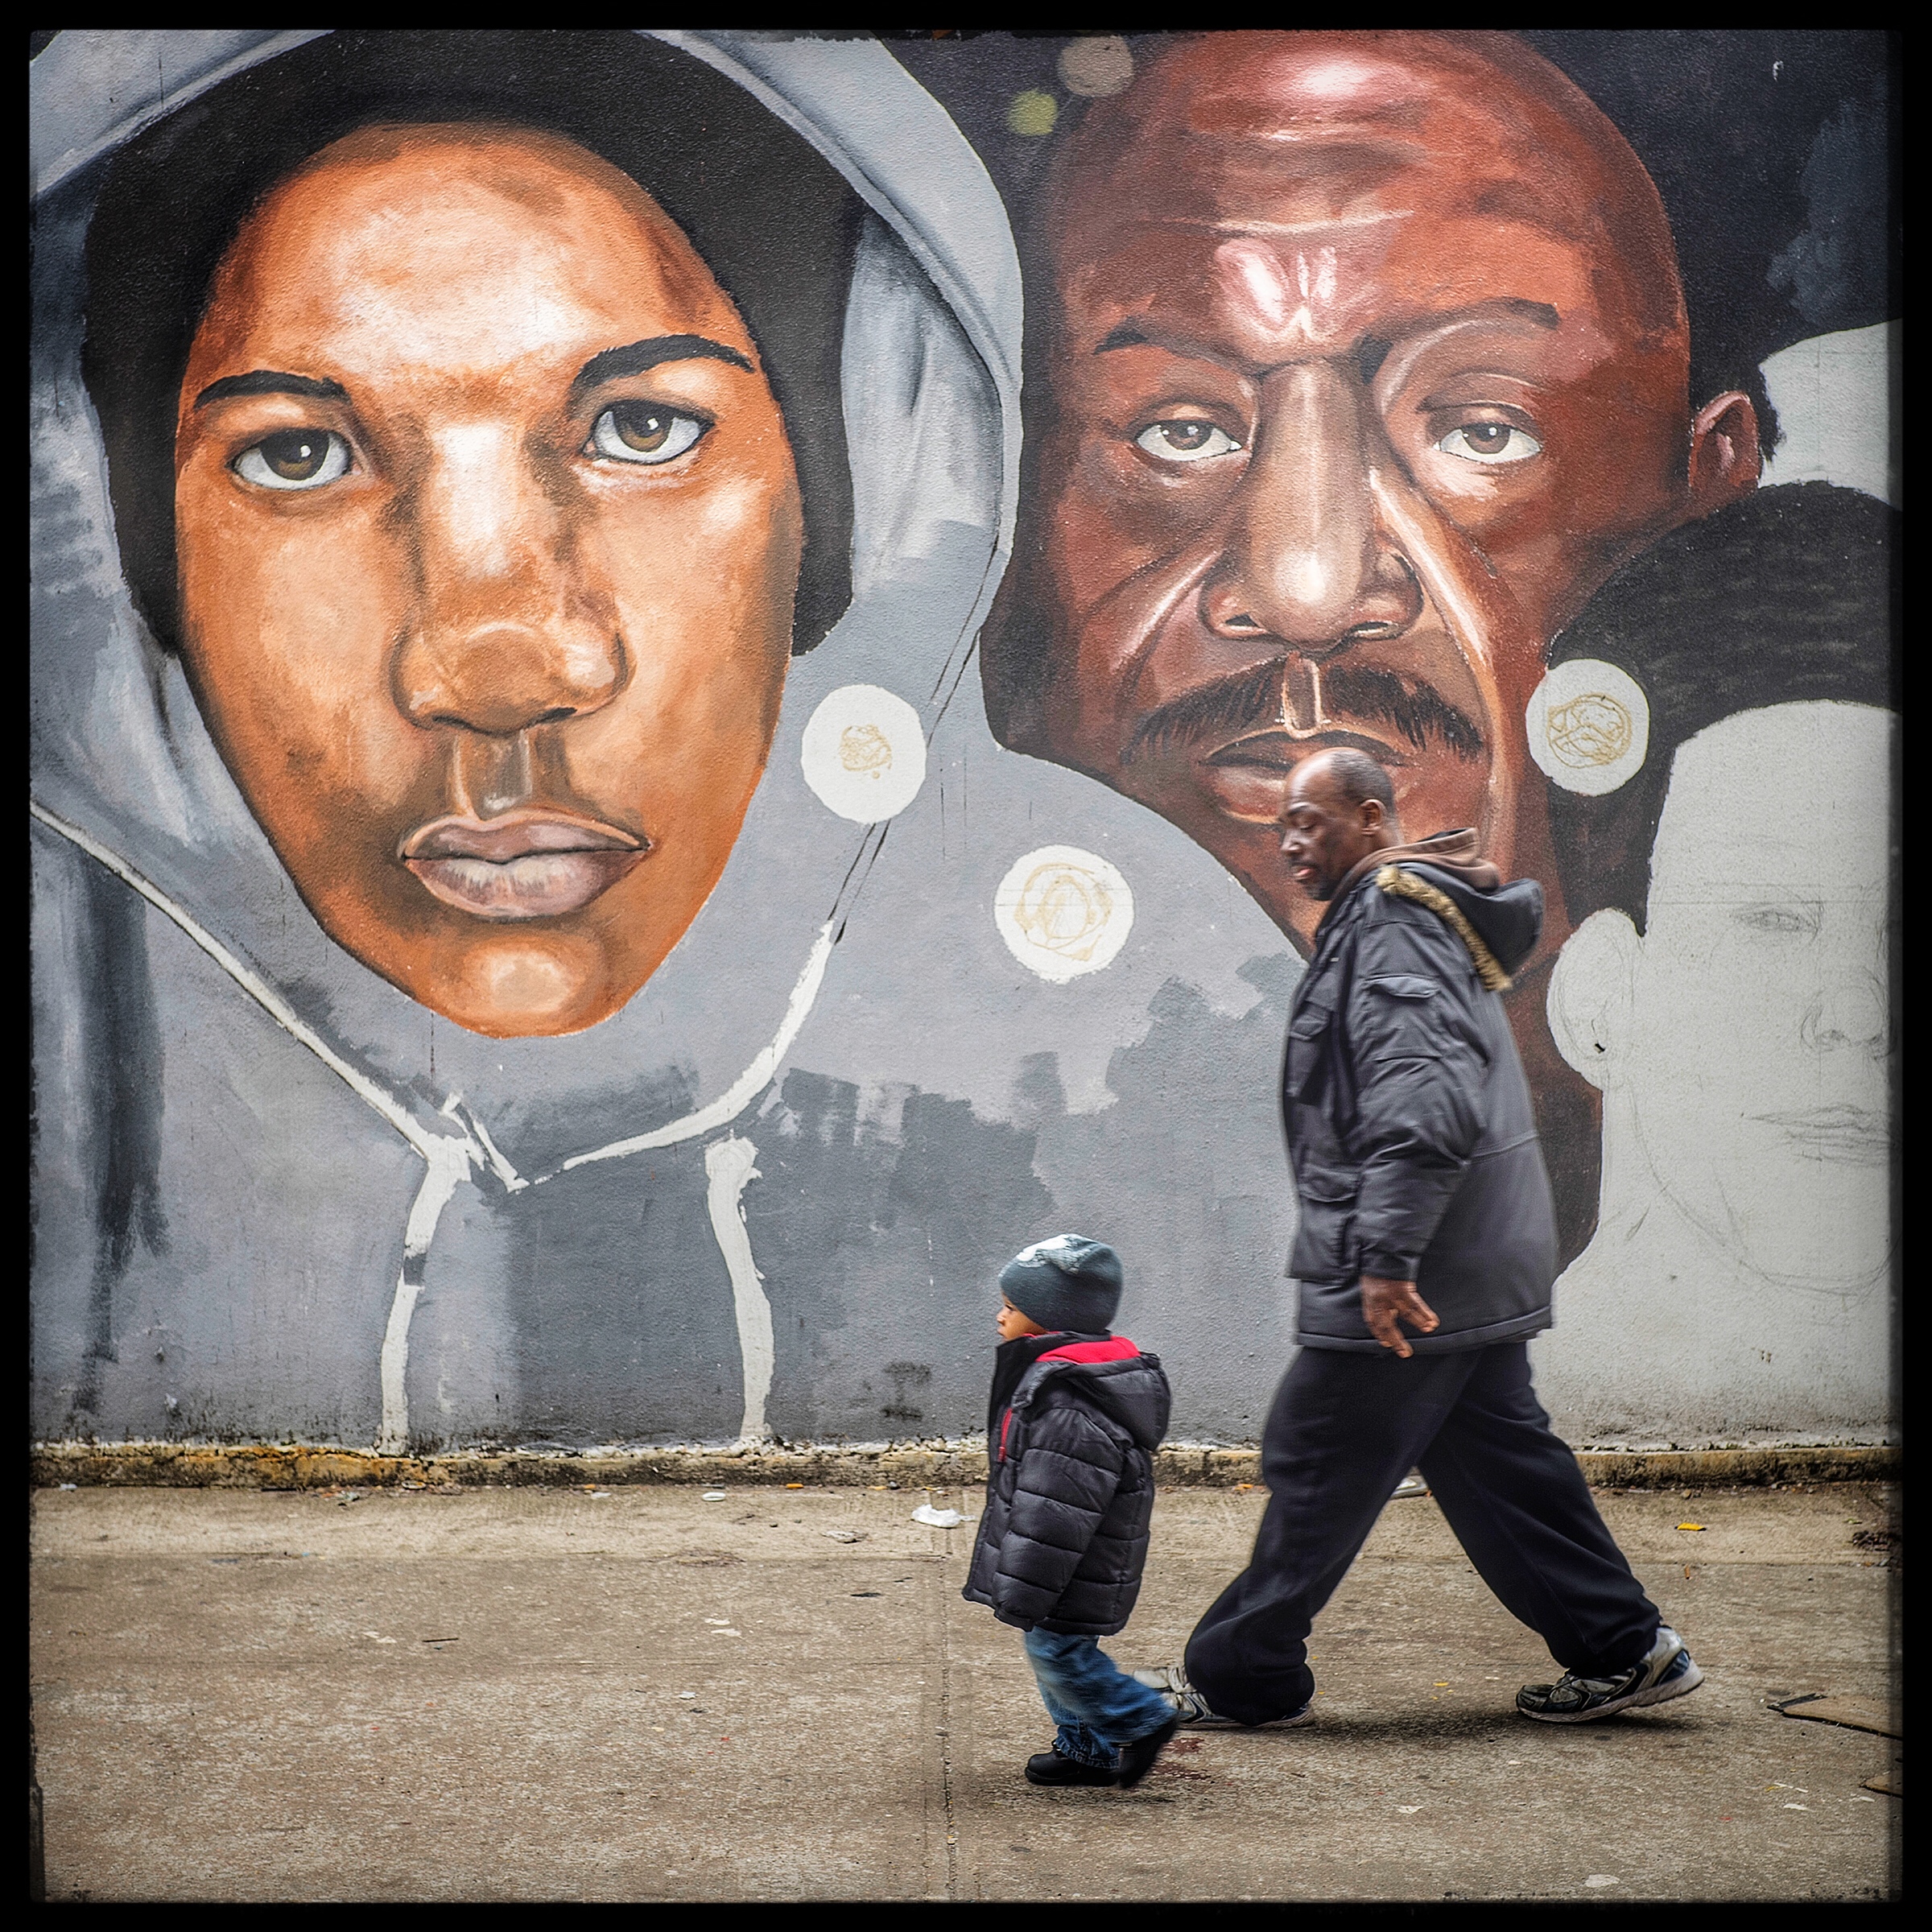 A father and son reflected against the portrait of Trayvon Martin's face on the mural in Brooklyn.